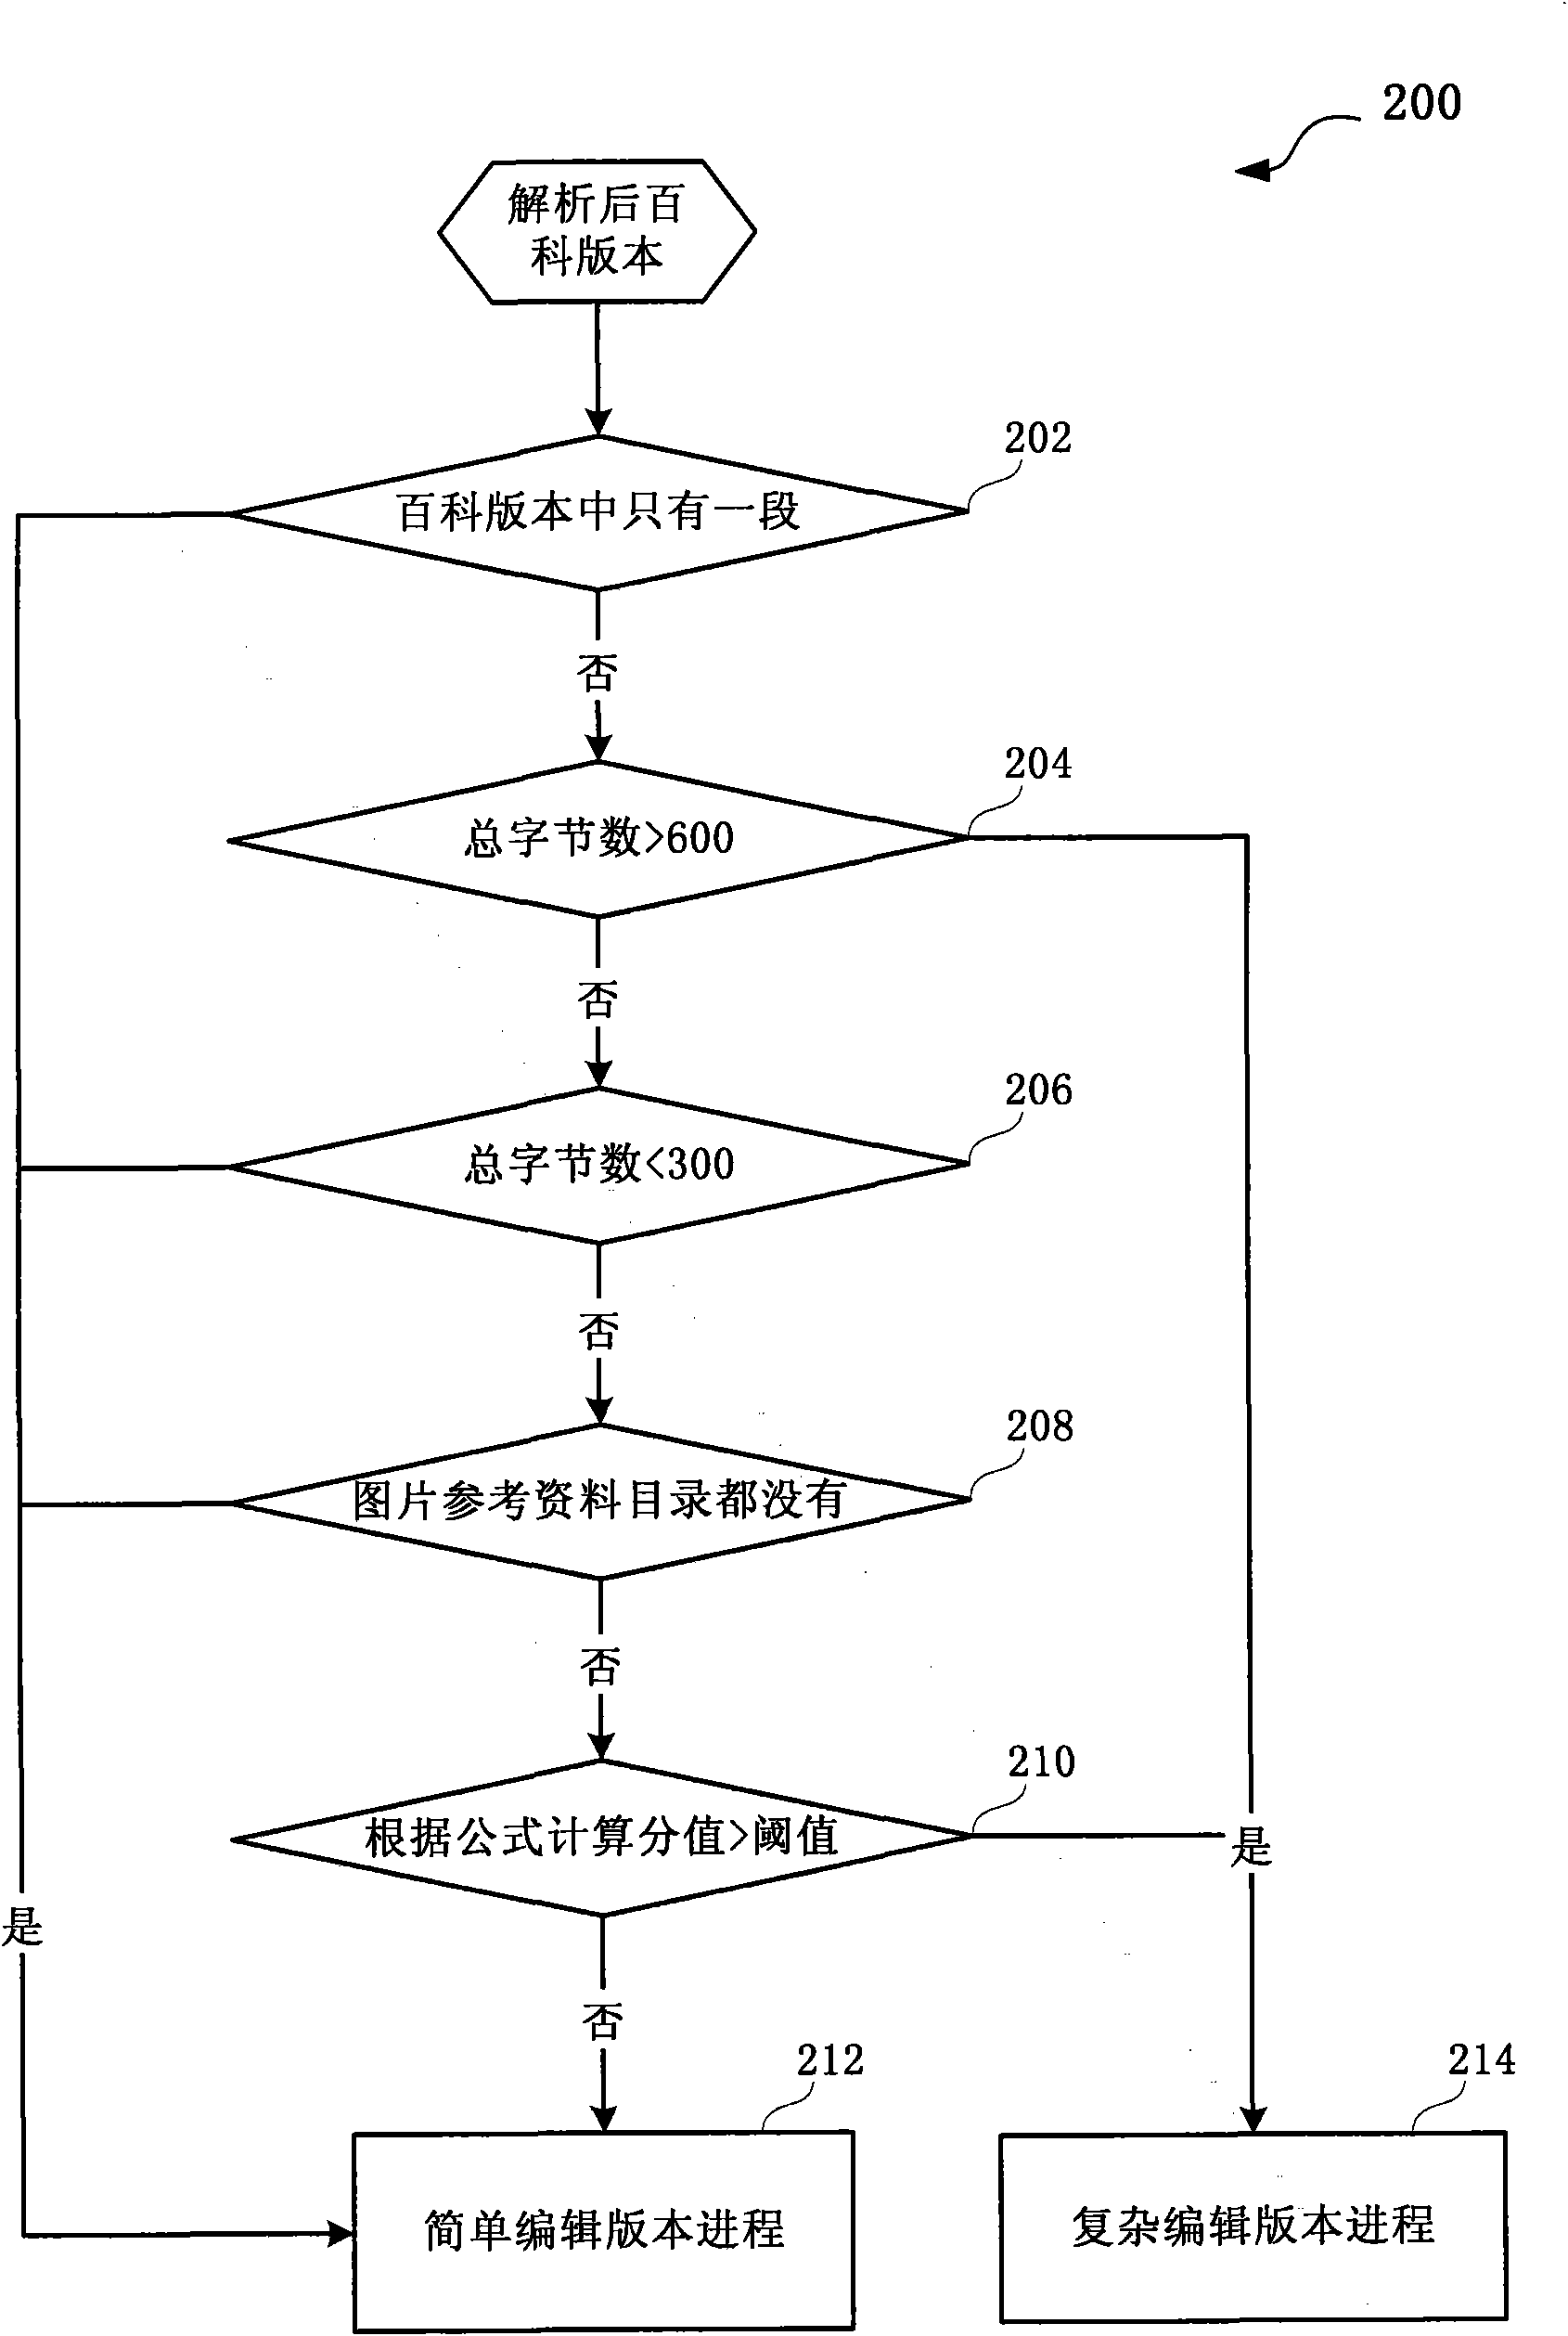 Method and system for screening high-quality versions